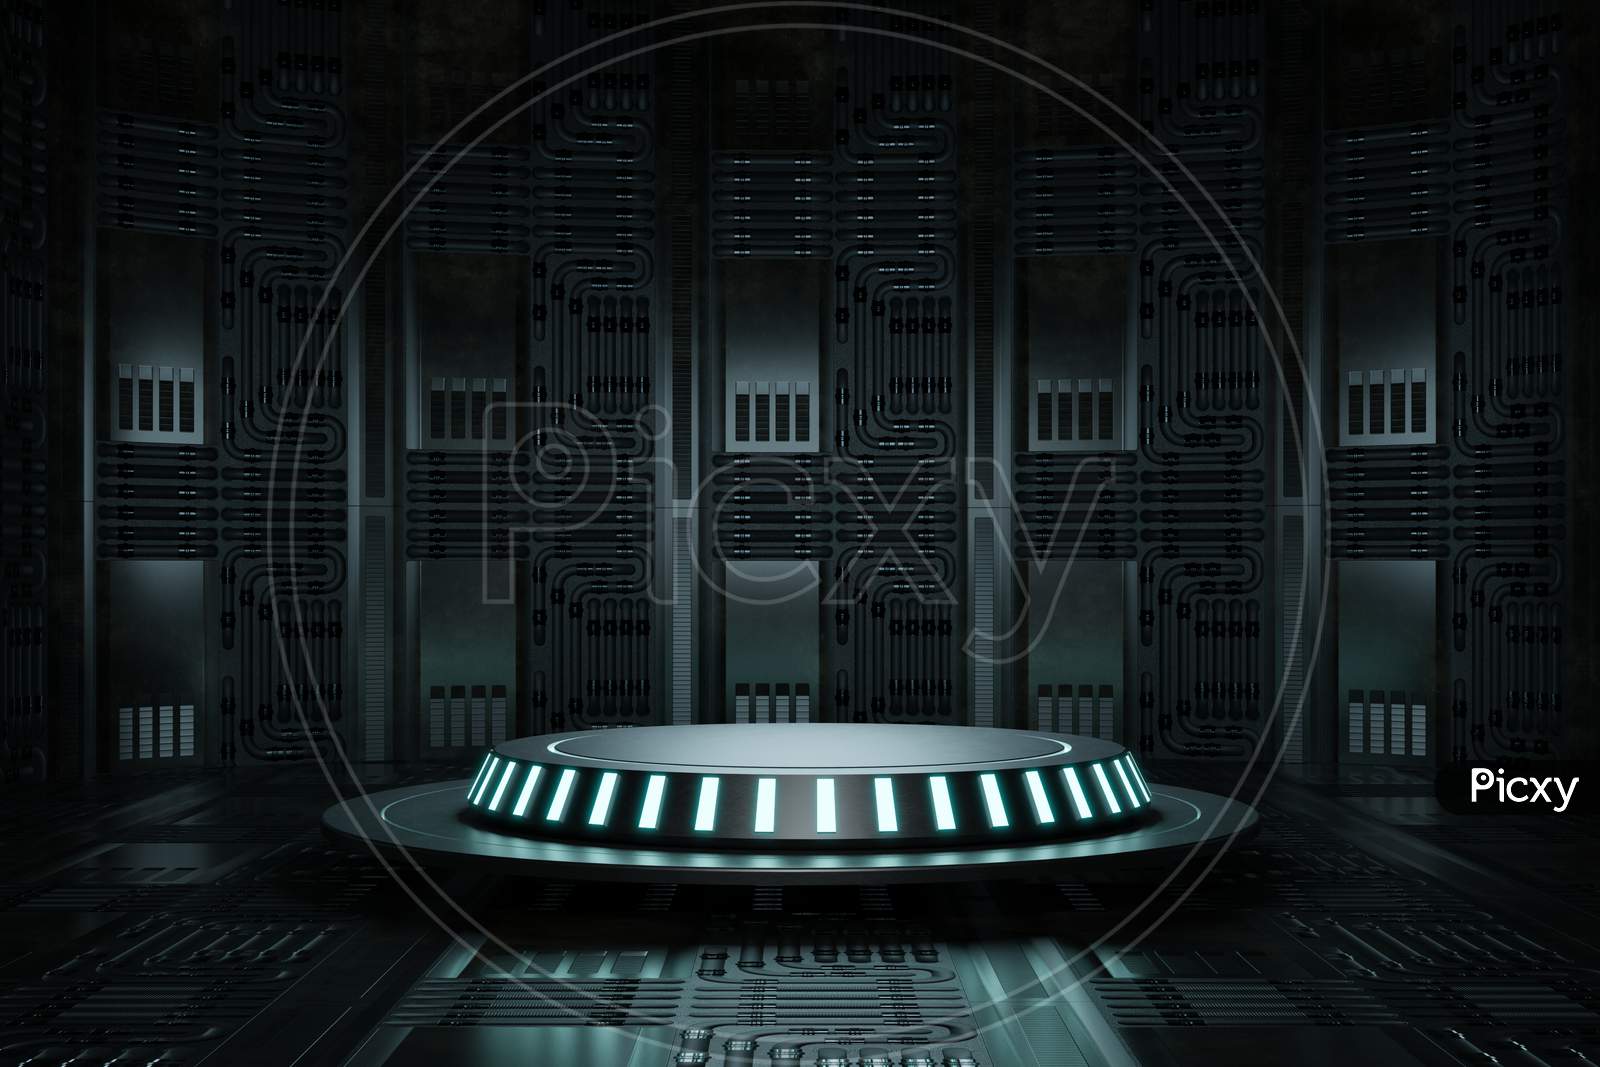 High-Tech Product Podium Platform Studio In Spaceship With Electric Wire Lamp And Engine Background. Hi-Tech Retro Stage And Future Science And Technology Theme. 3D Illustration Rendering Graphic